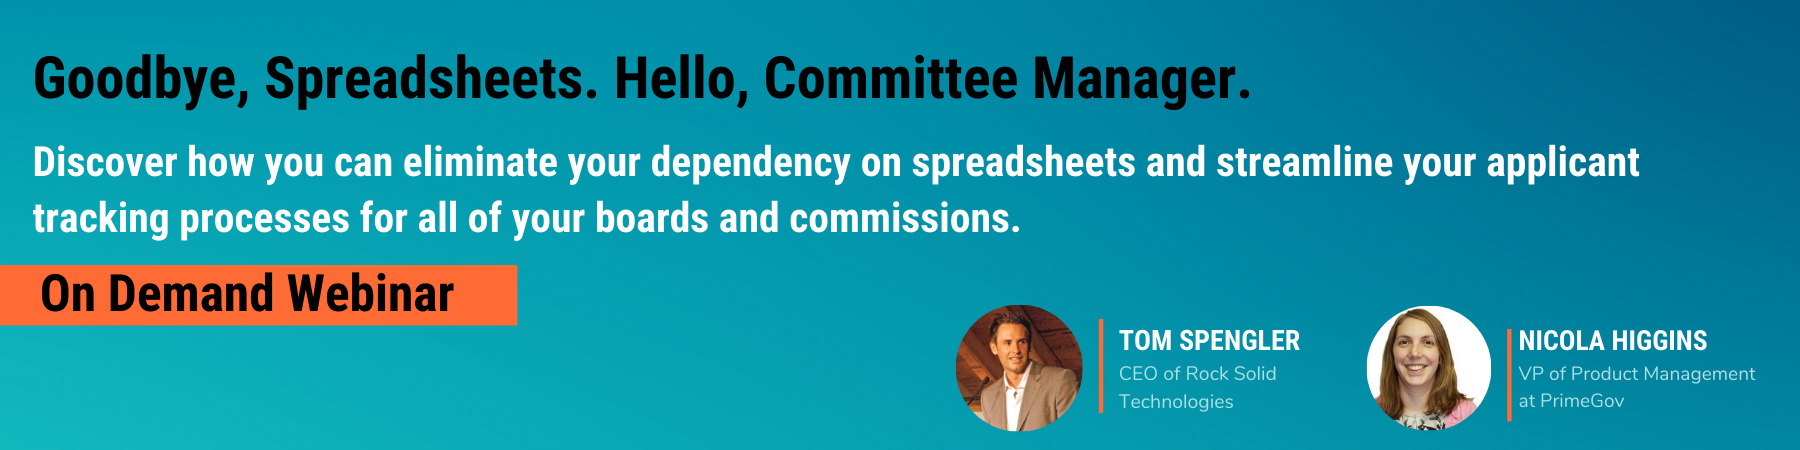 On demand webinar: How you can eliminate spreadsheets and streamline the tracking process for your boards and commissions.